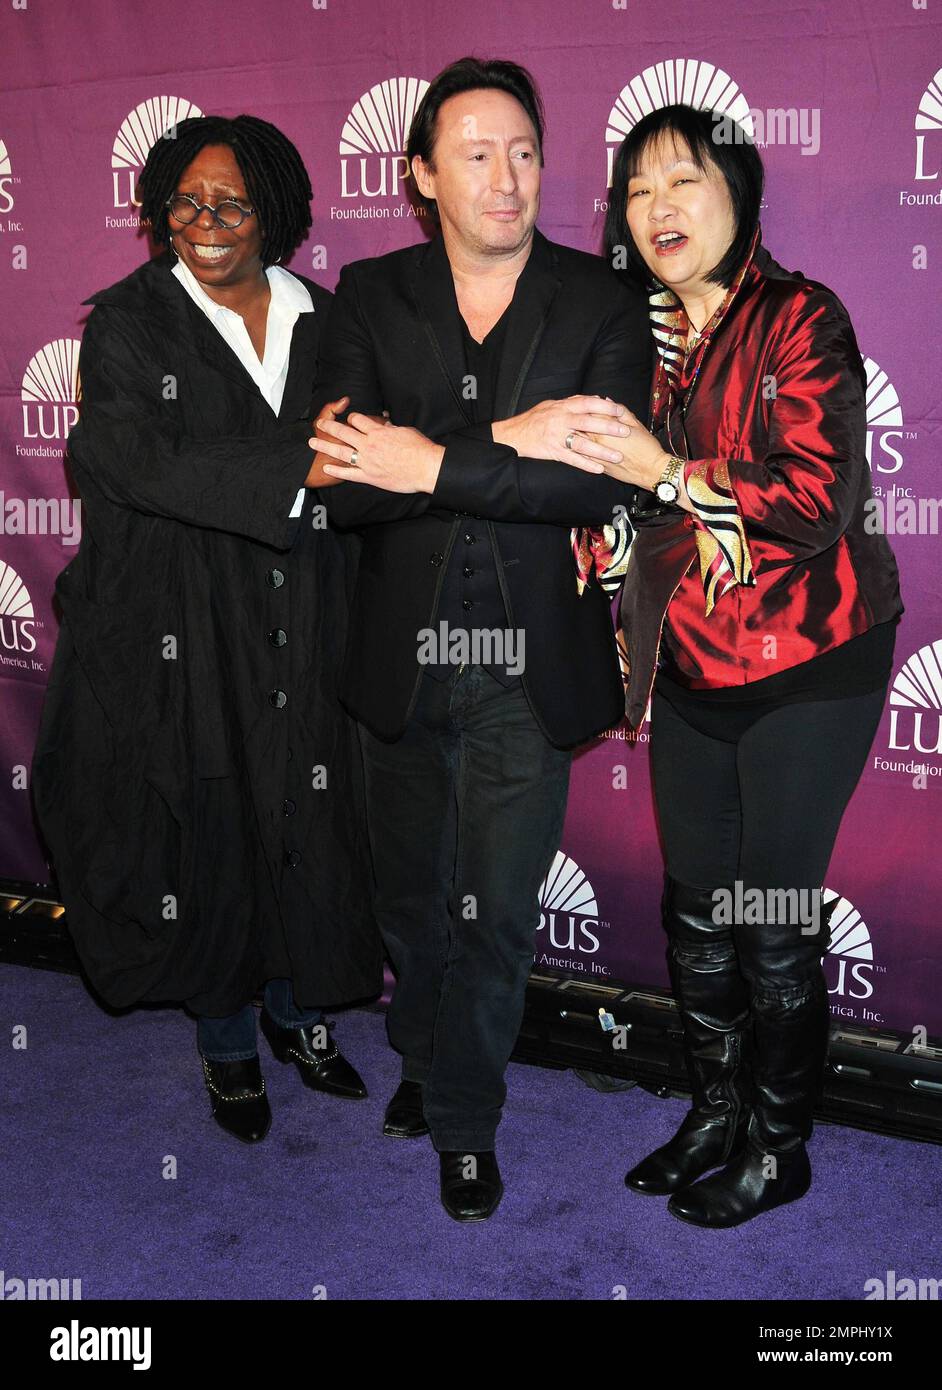 Whoopi Goldberg, Julian Lennon and May Pang at the Lupus Foundation Butterfly Gala in New York, NY. 11th October 2011.  . Stock Photo